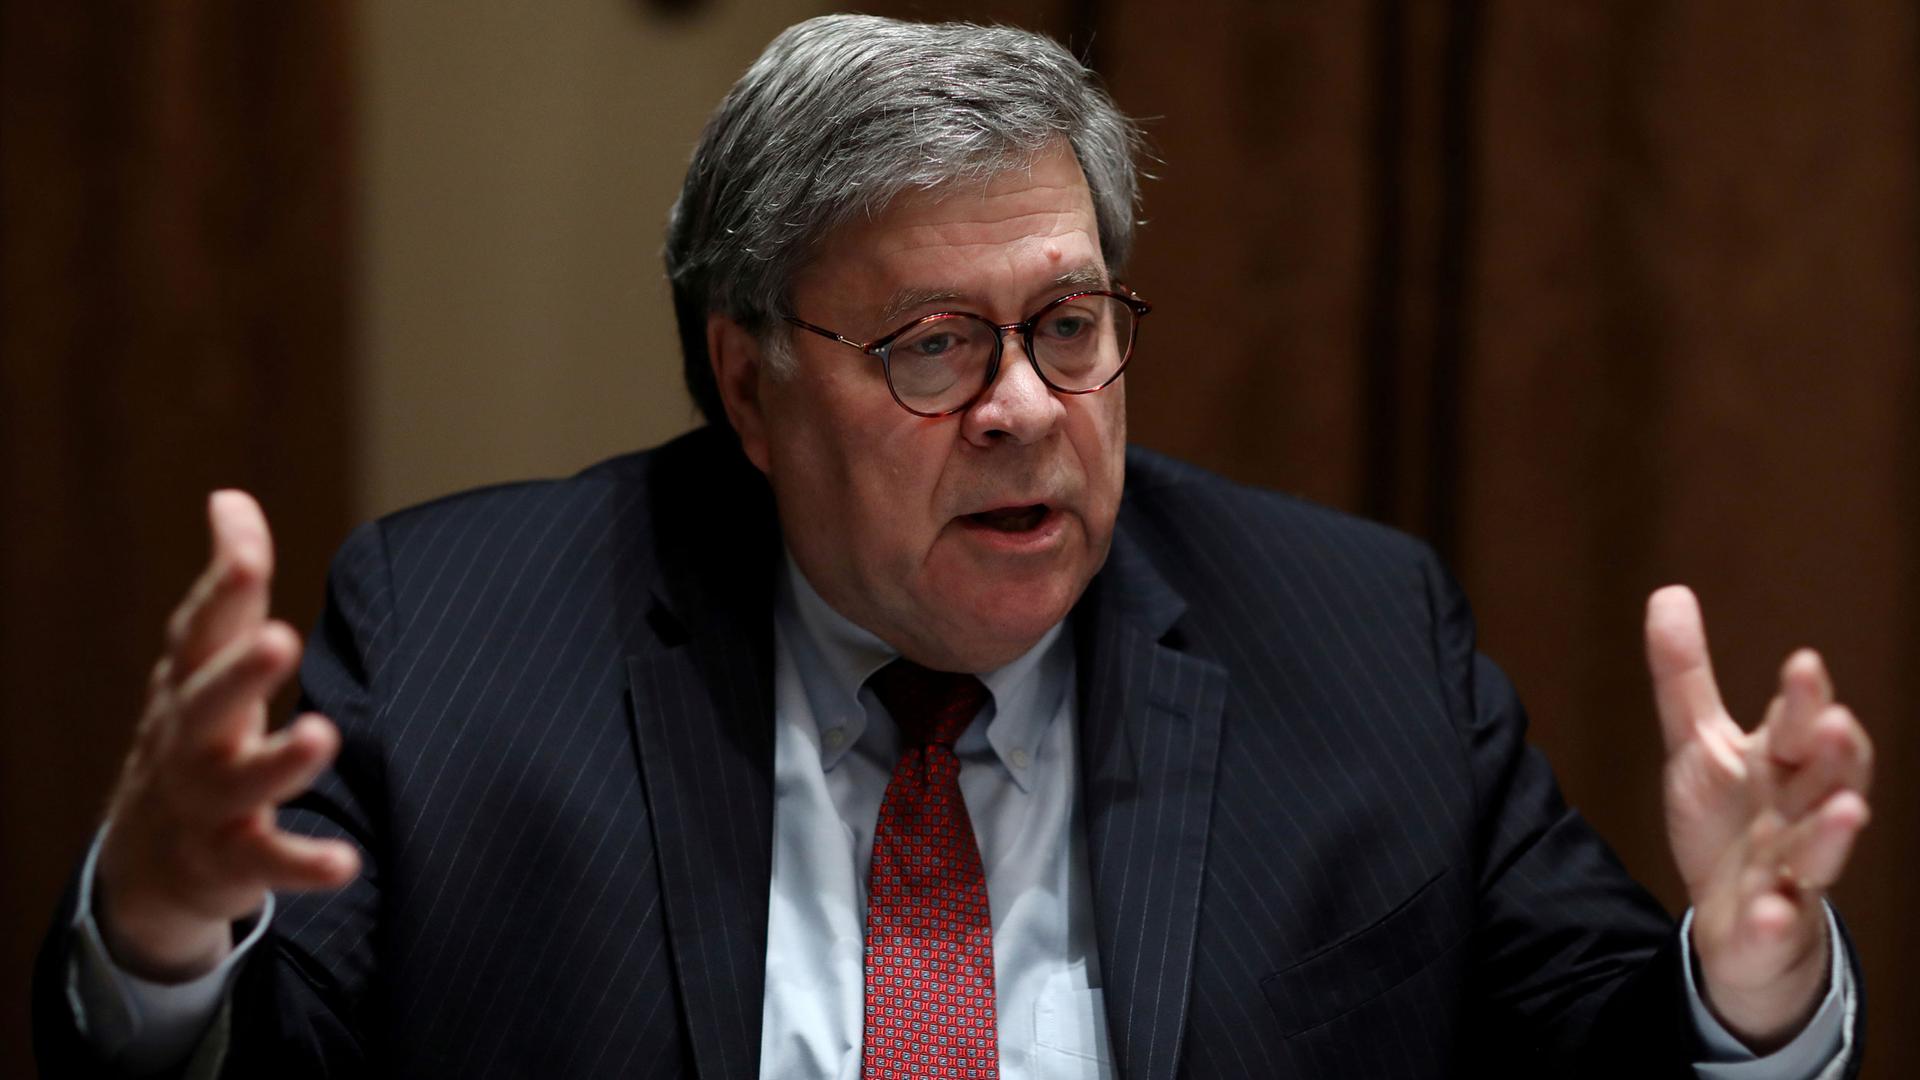 US Attorney General William Barr is shown wearing a dark suit and red tie with his hands outstretched.